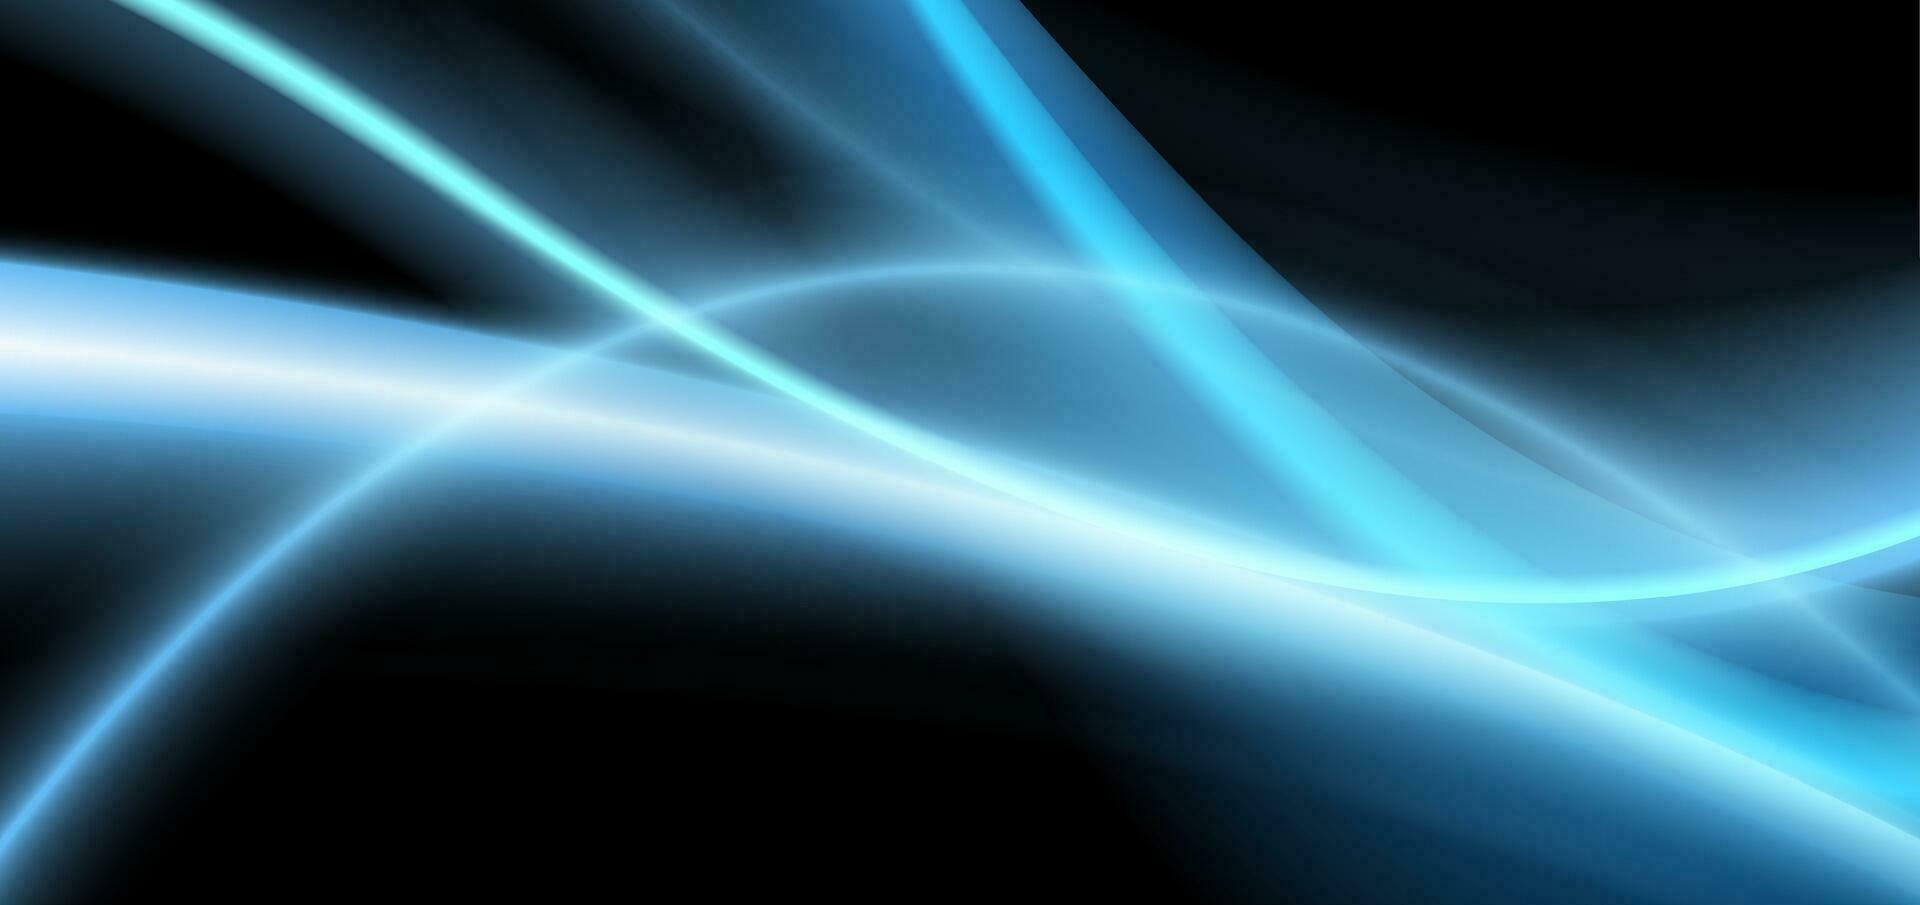 Dark blue shiny smooth flowing waves abstract background vector